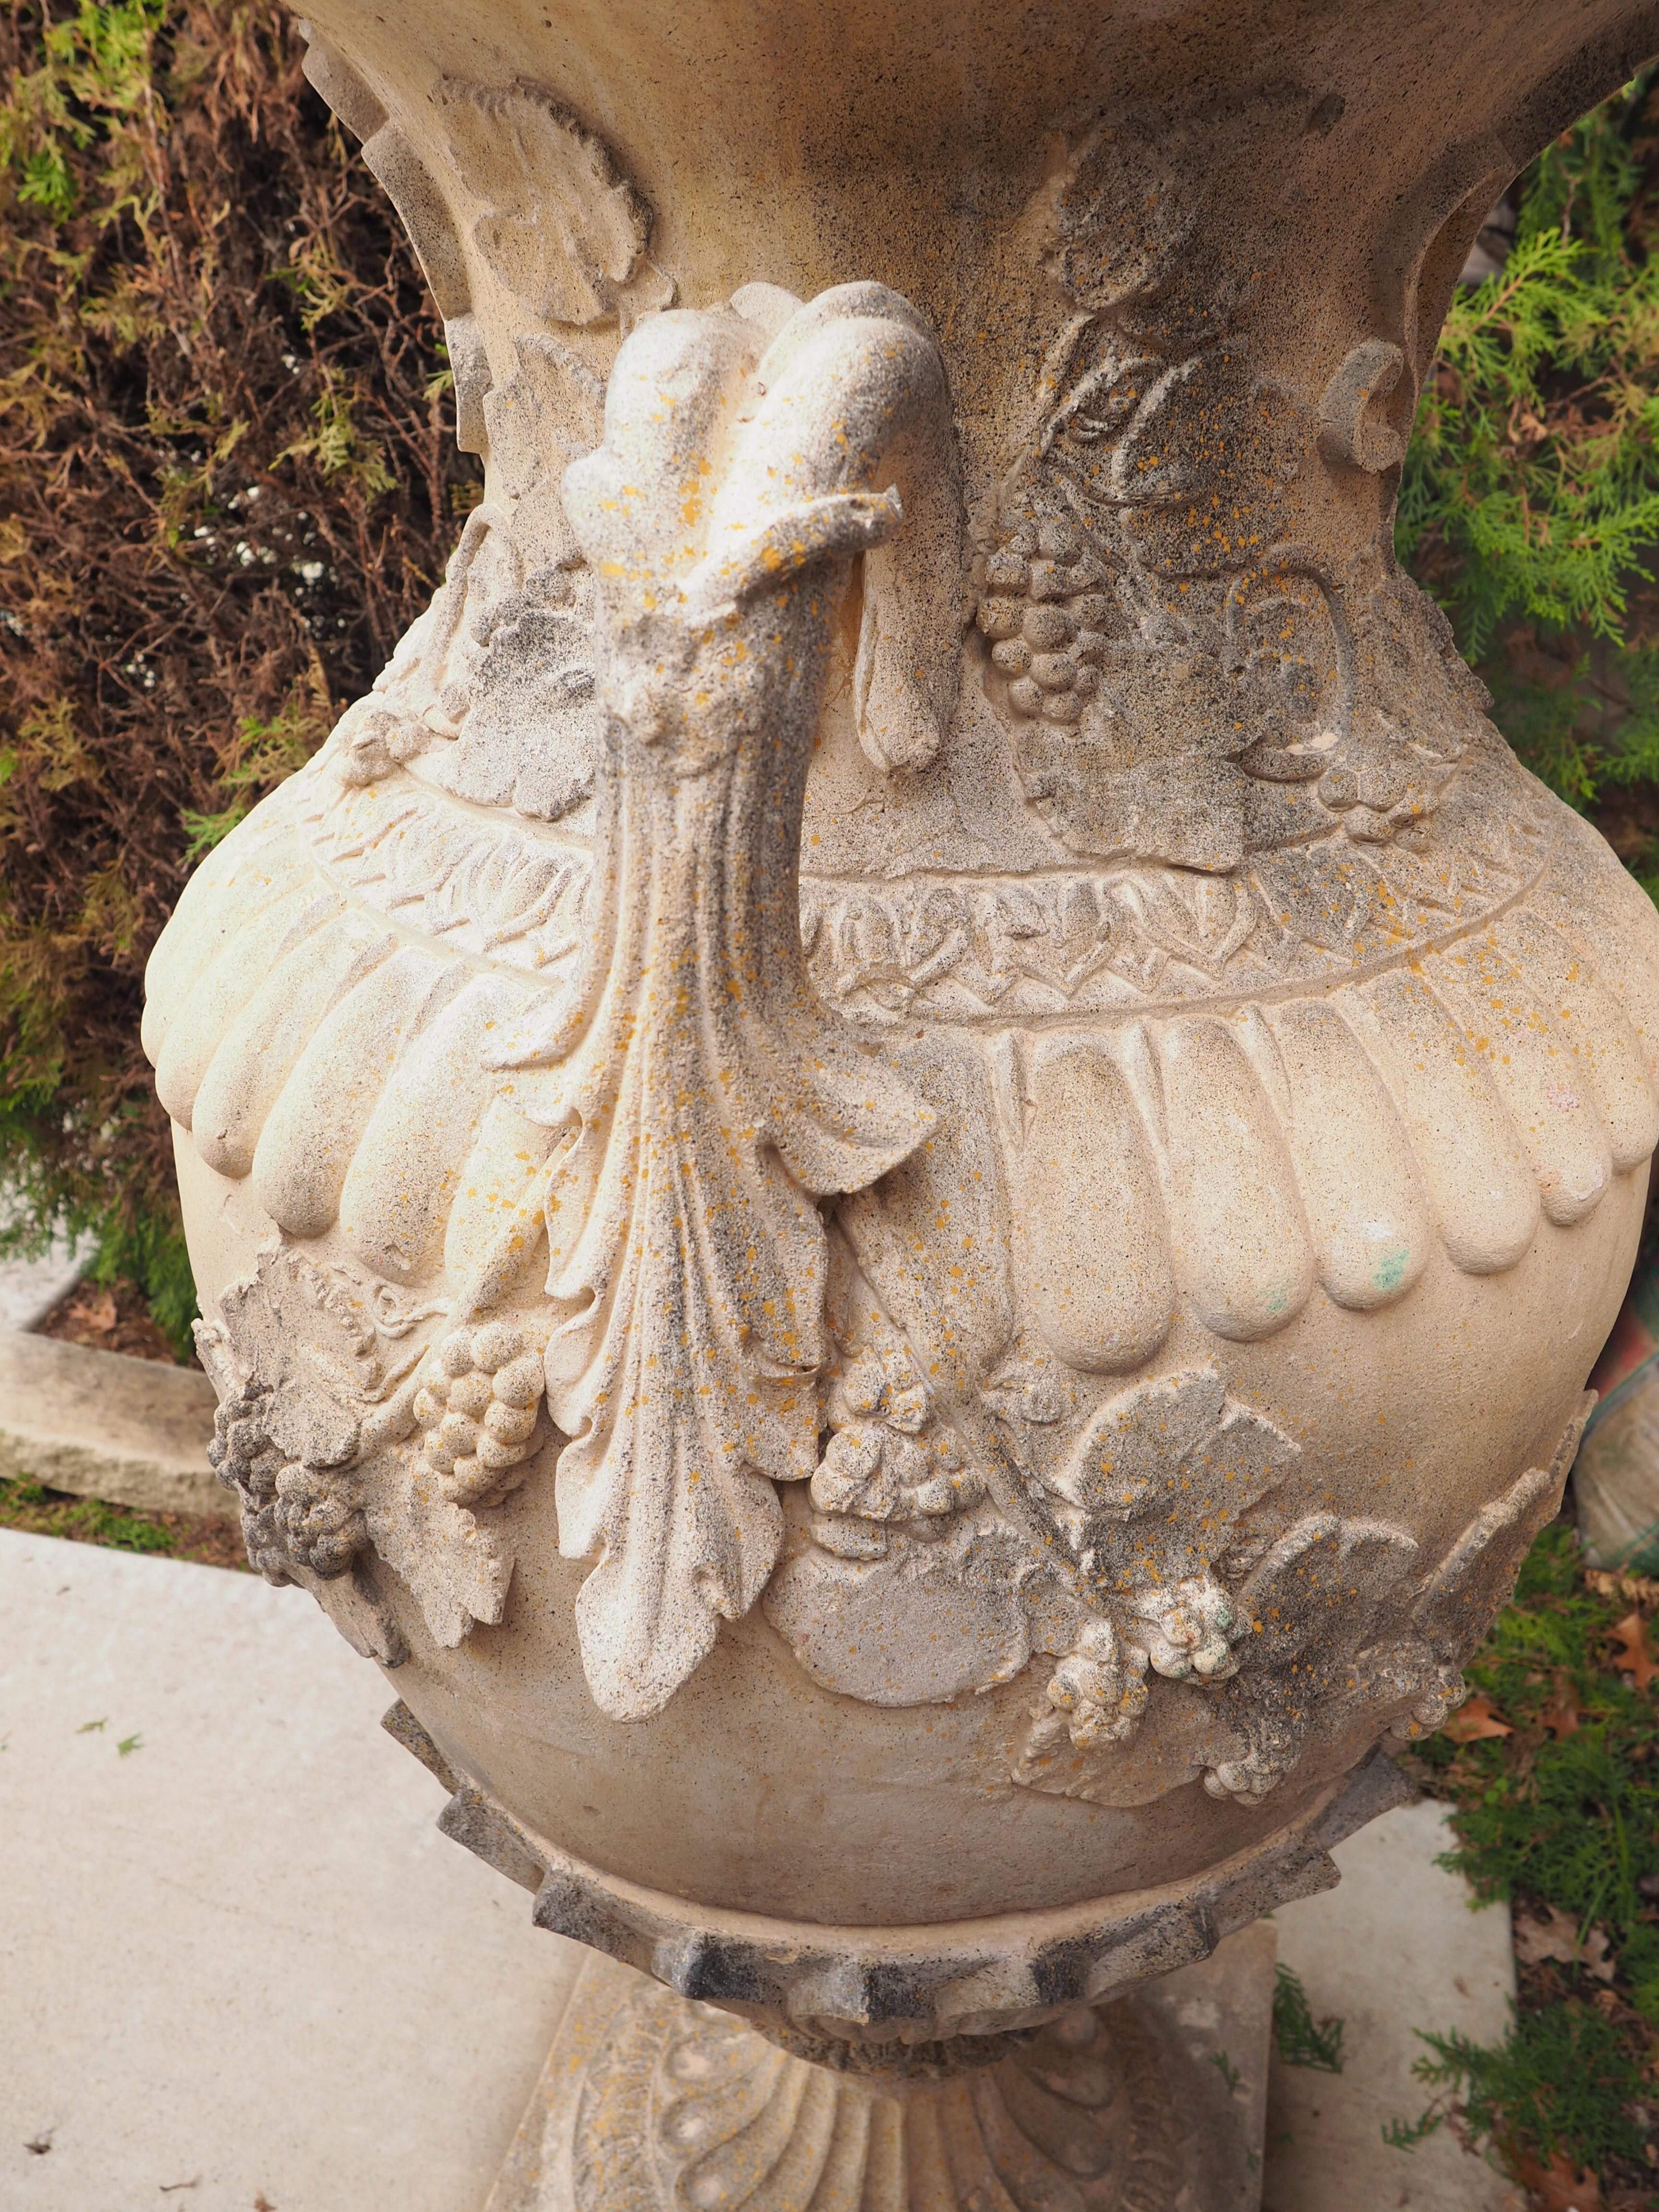 Contemporary Pair of Tall and Decorative French Cast 3-Piece Lidded Garden Urns with Handles